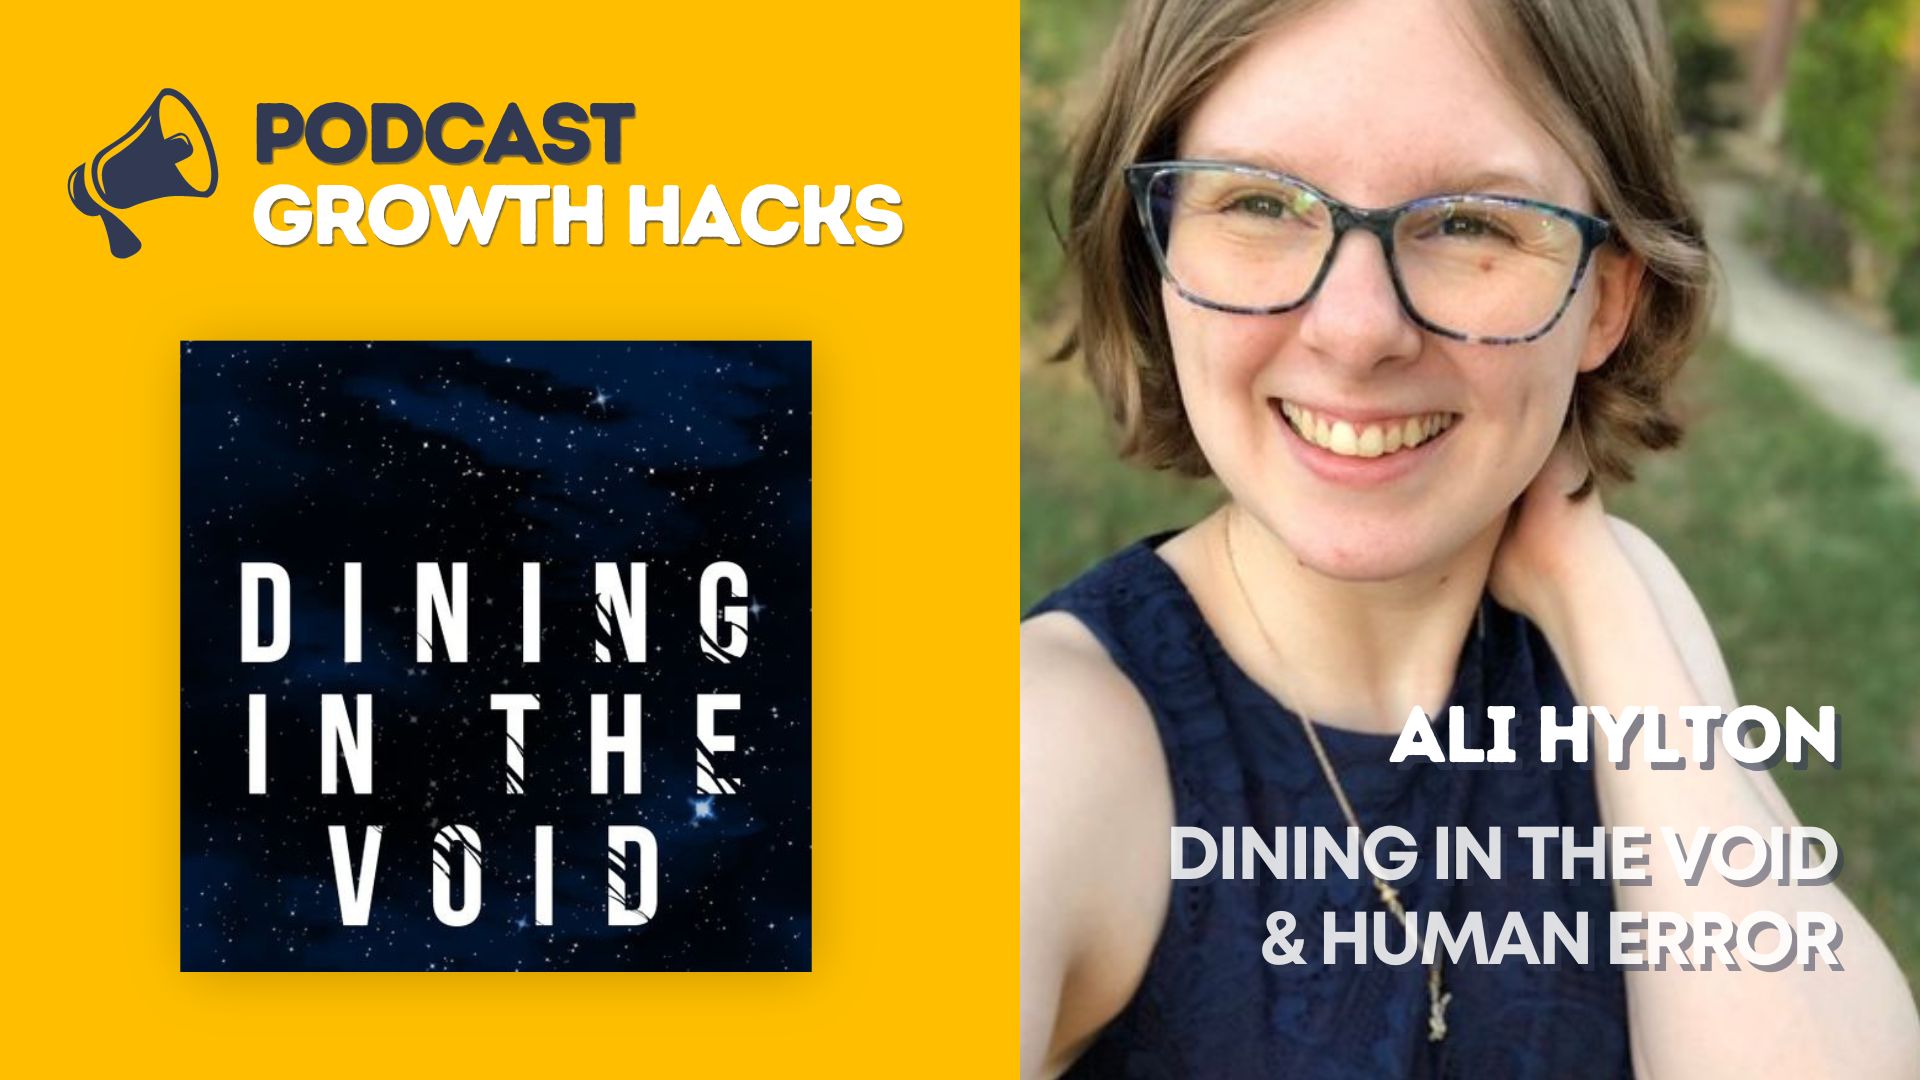 Ali Hylton - Dining in The Void - Podcast Growth Hacks